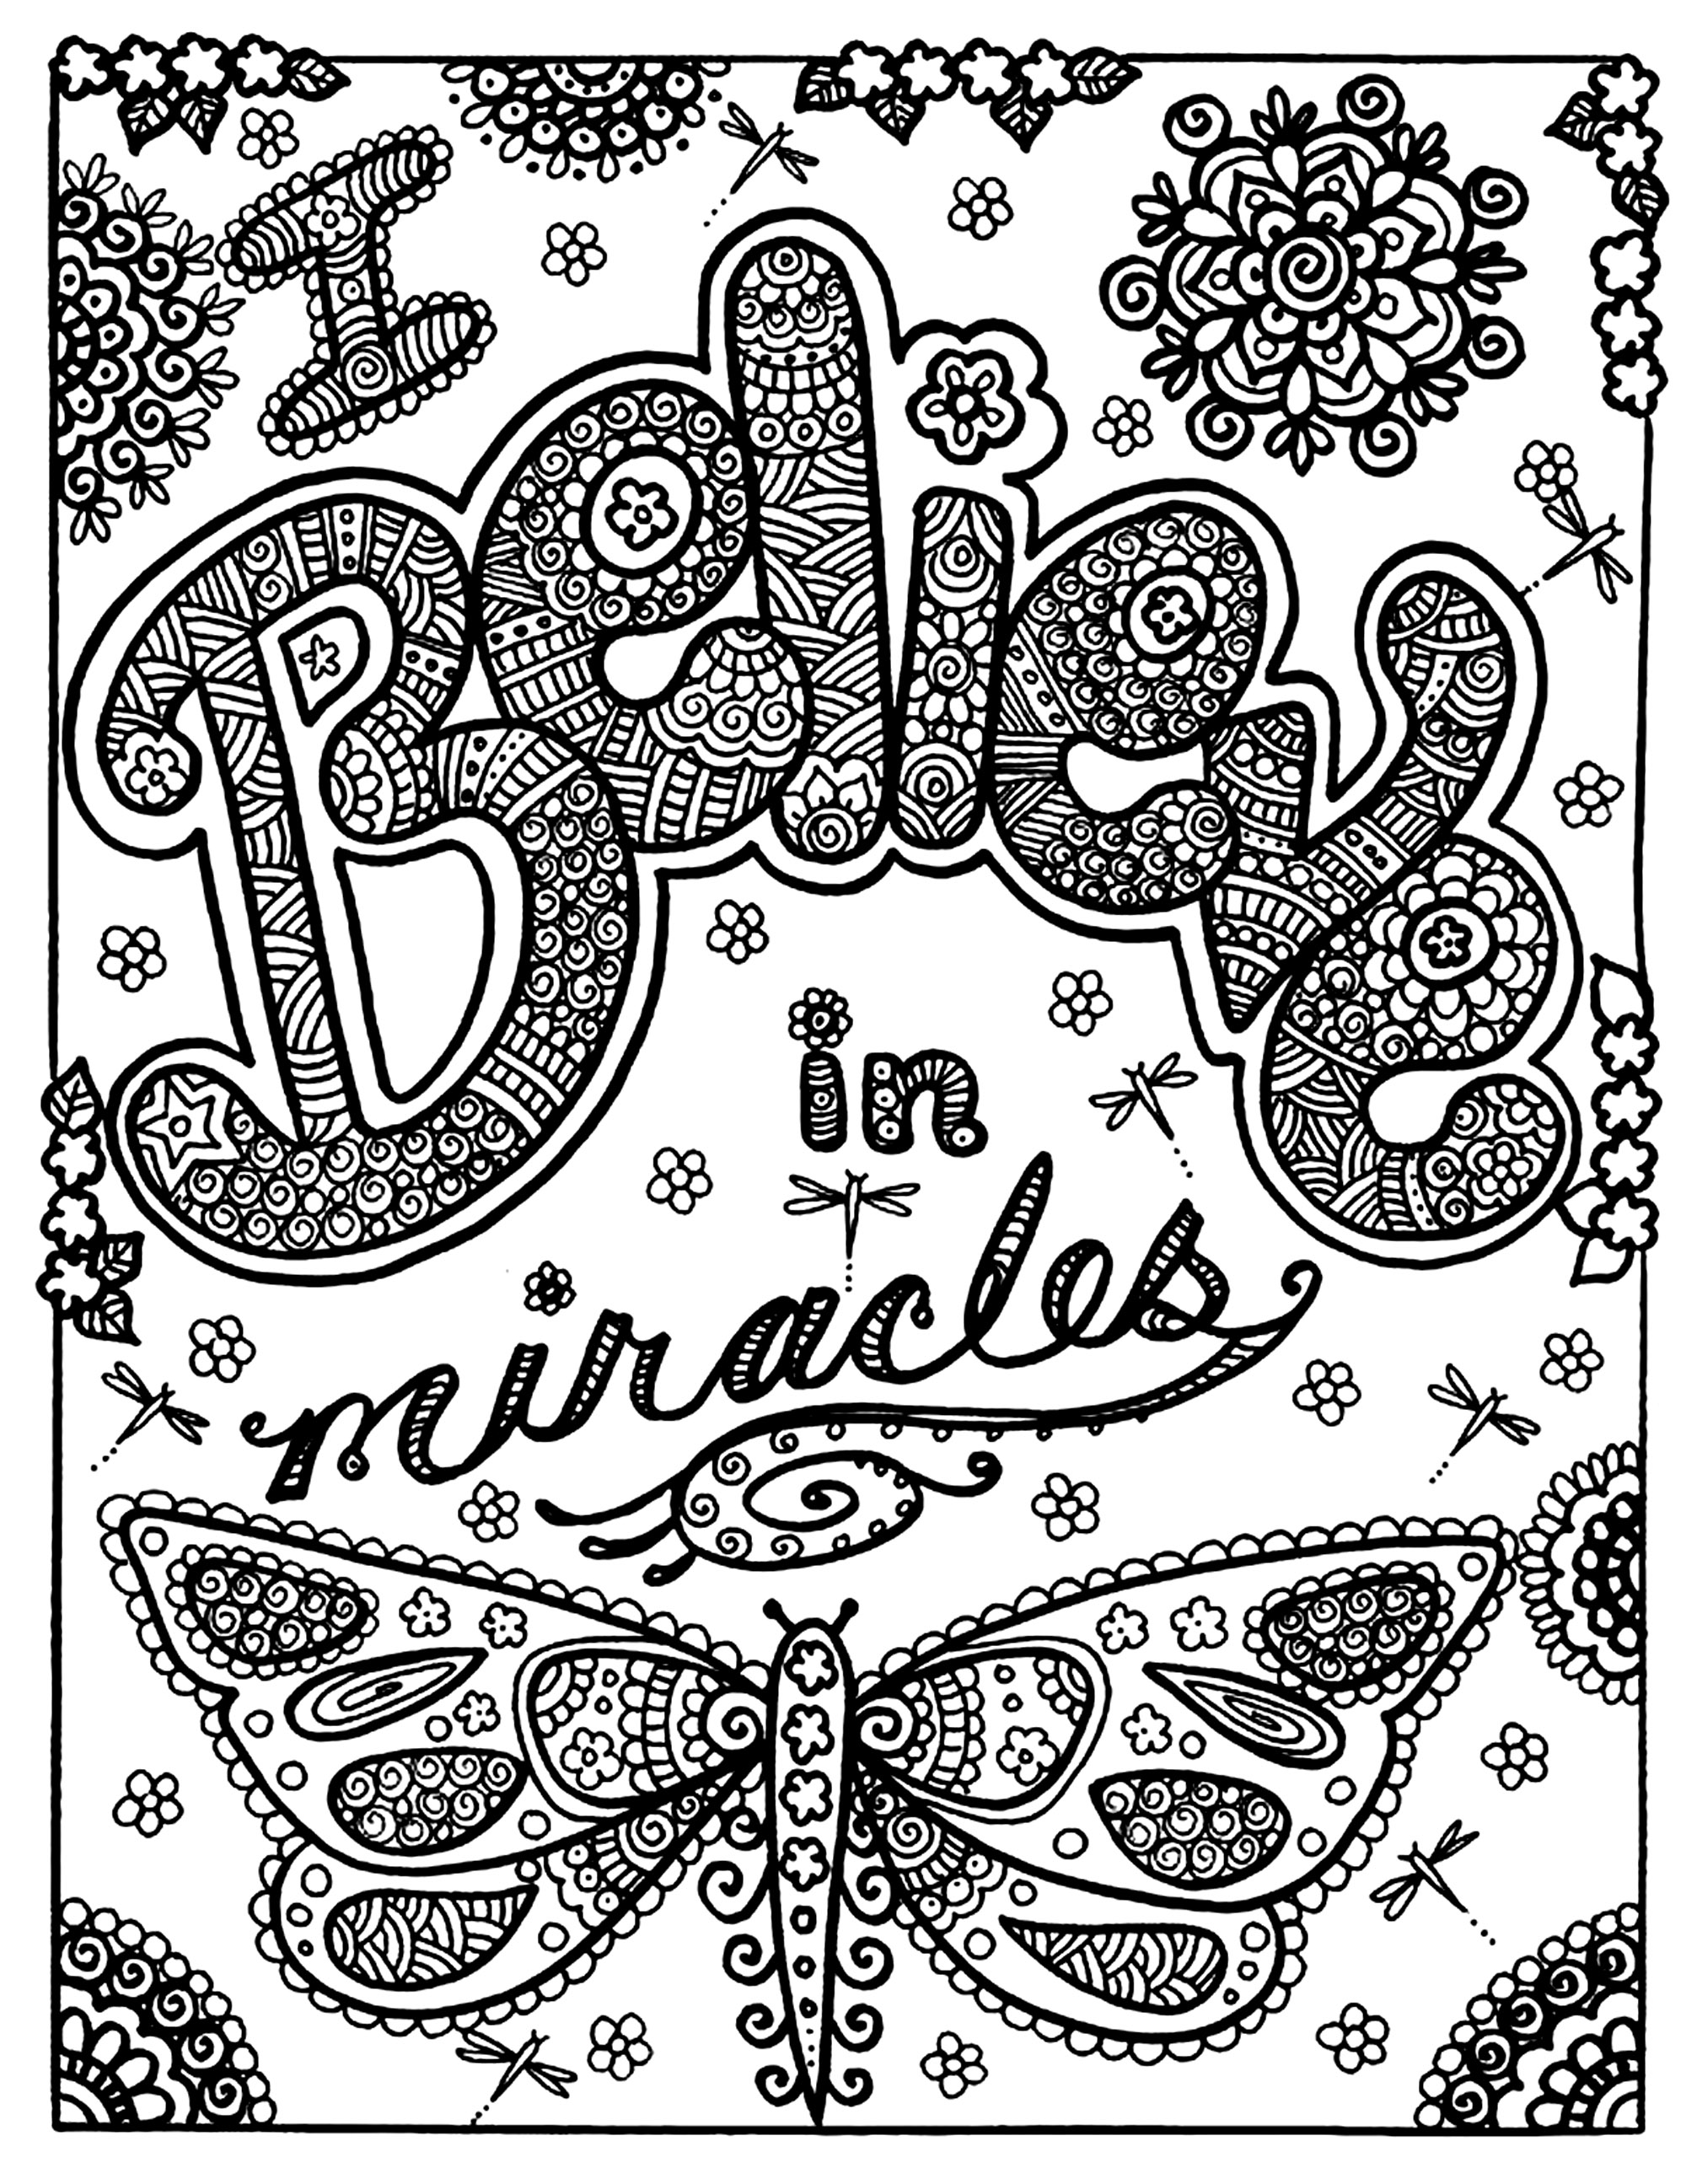 'Believe in miracles' !